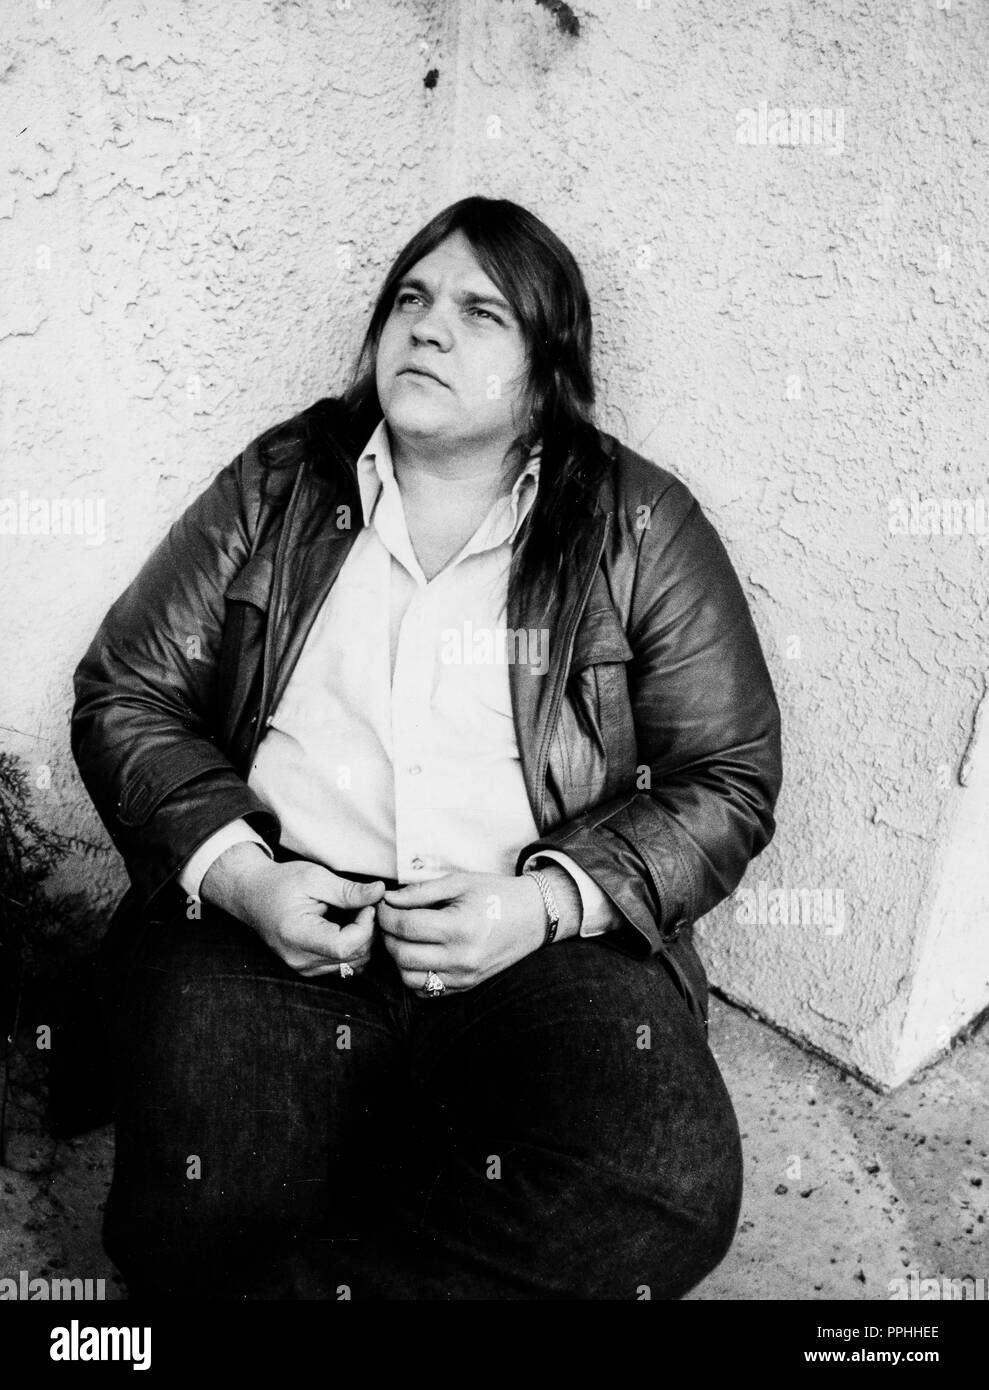 Meat Loaf, 70 s Stockfoto